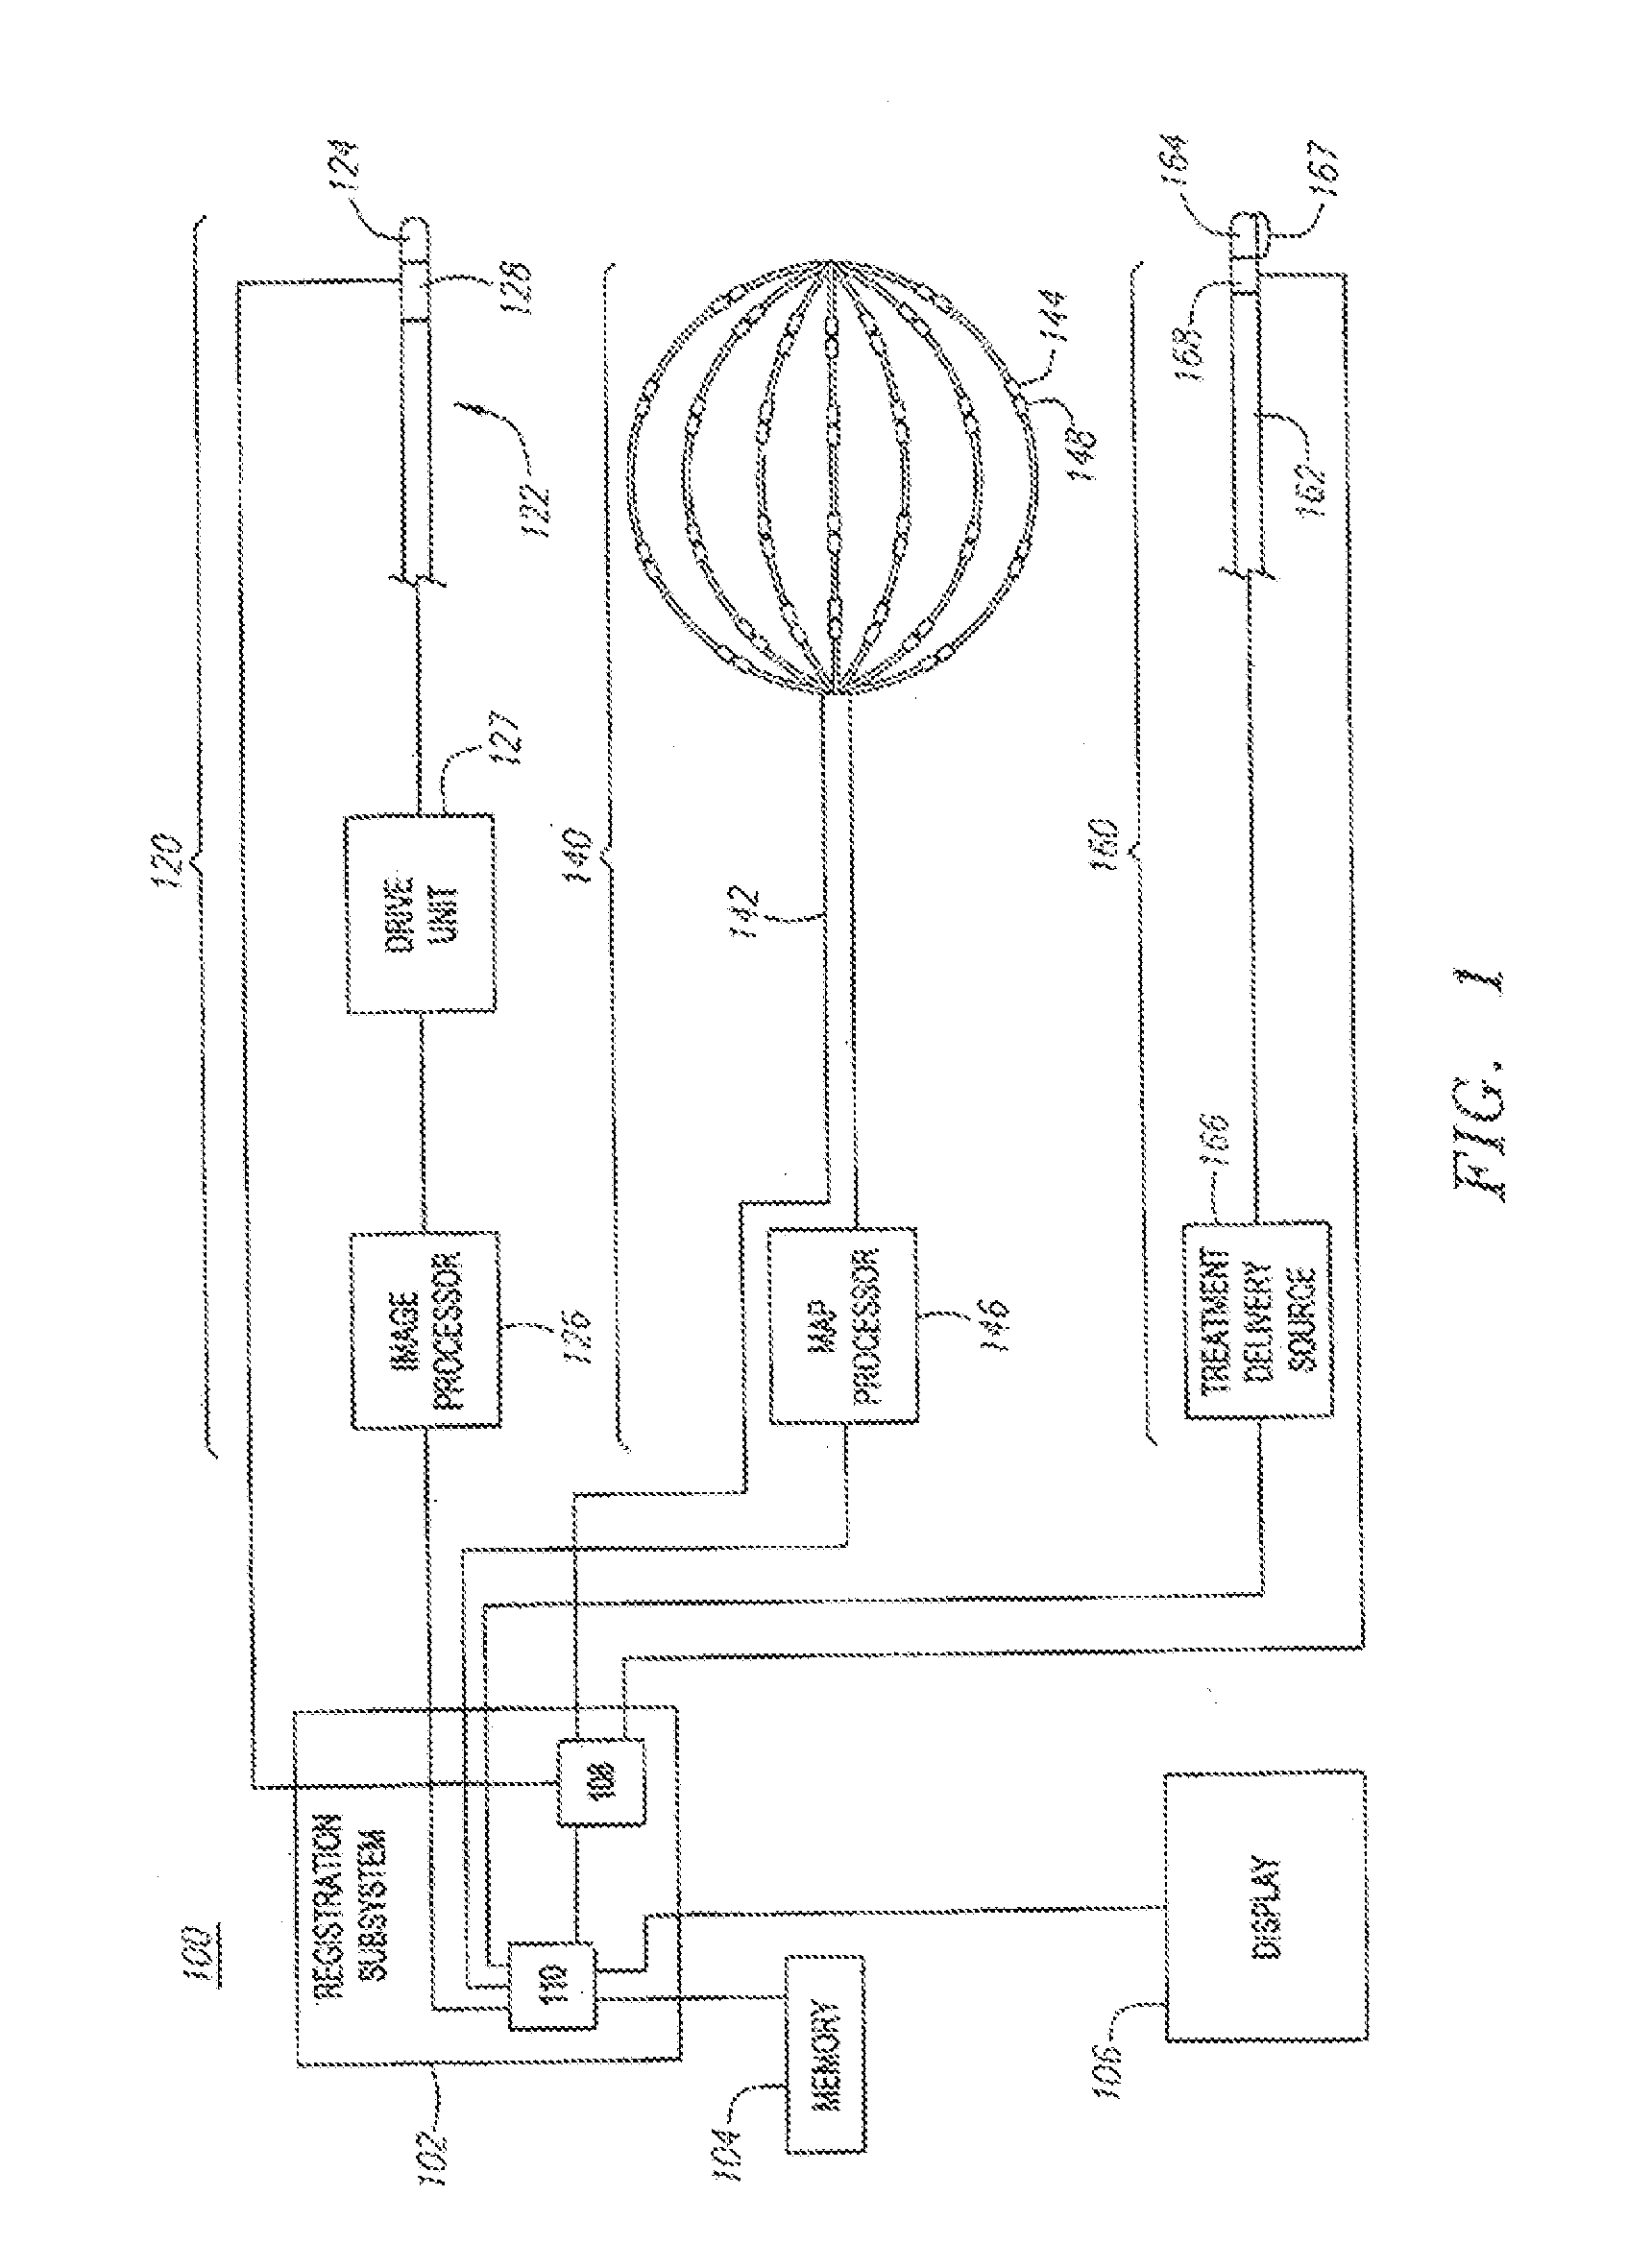 Systems and methods for guiding catheters using registered images